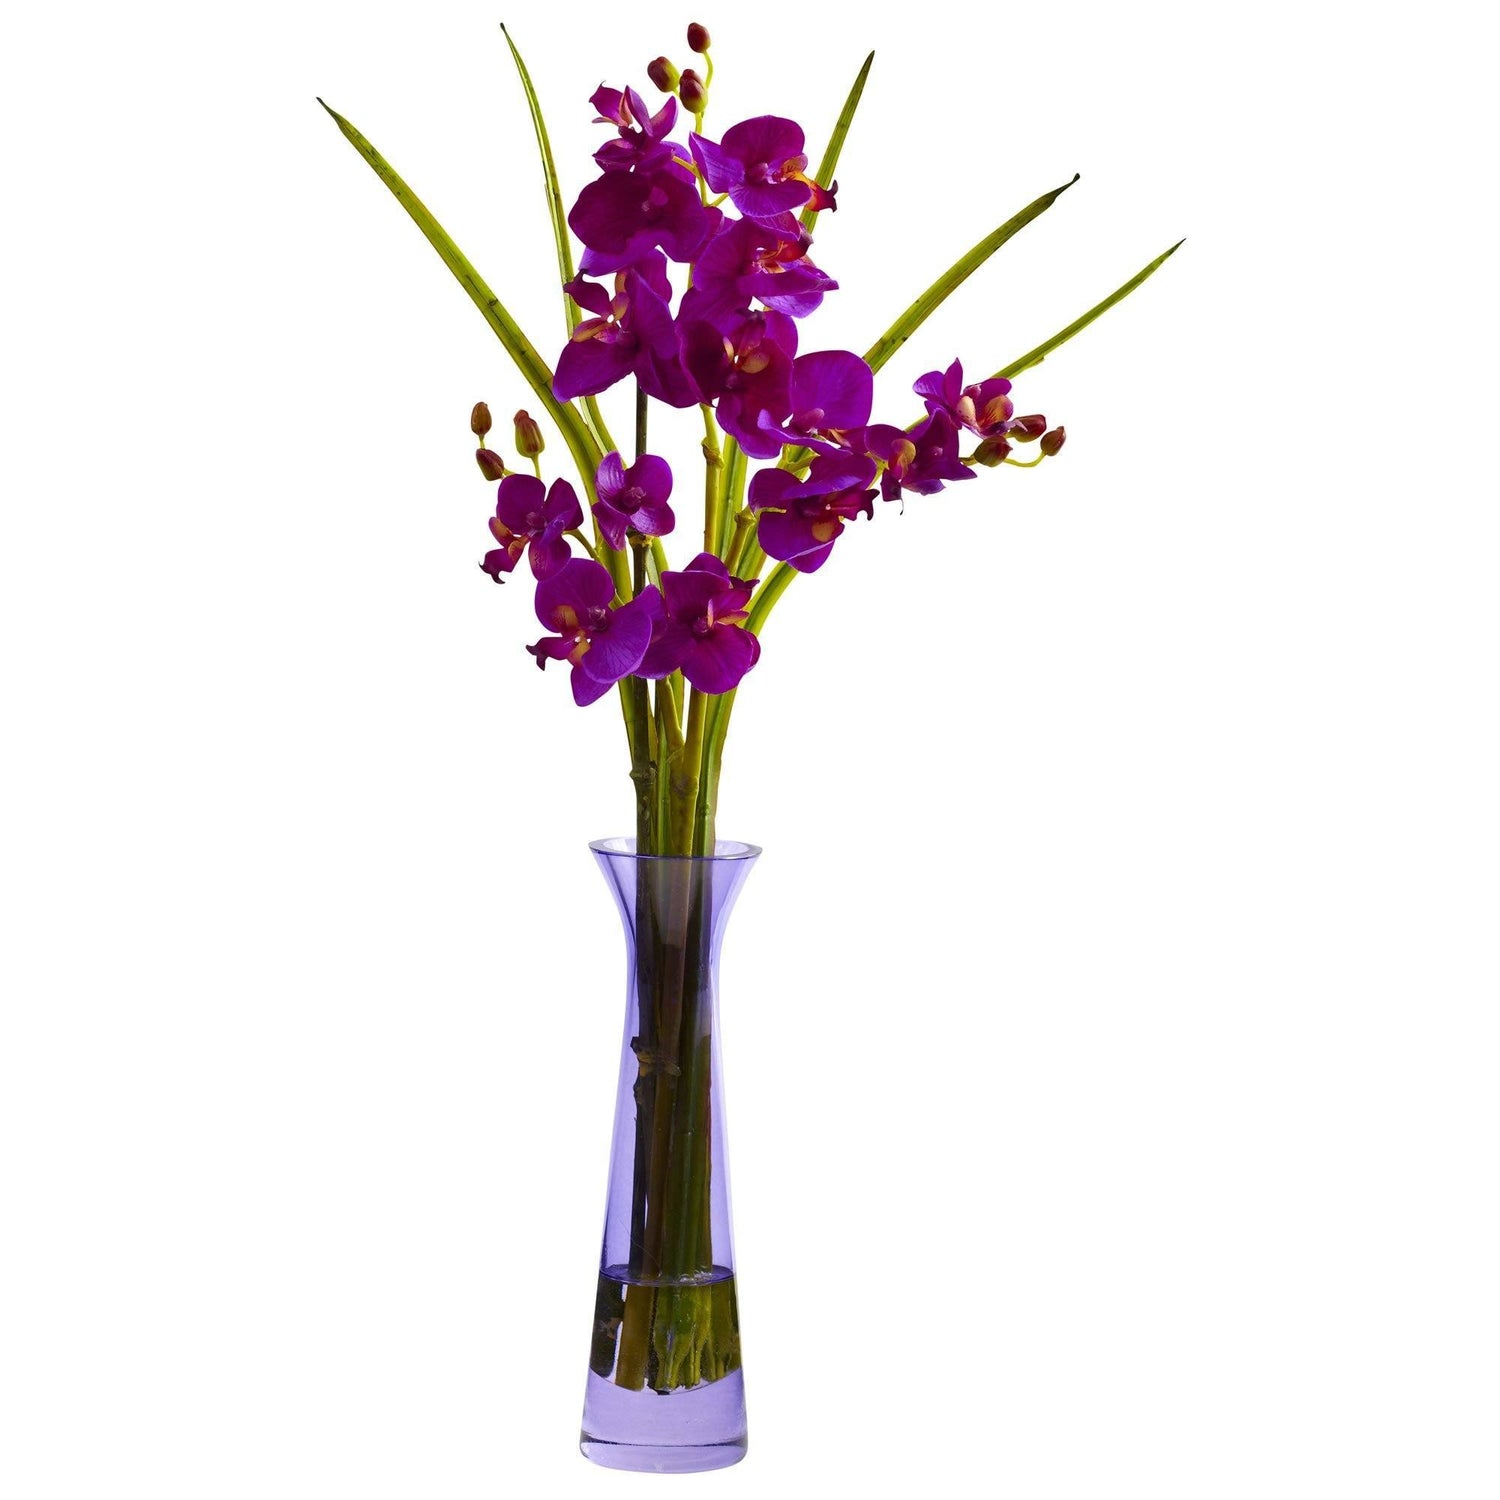 18" Artificial Mini Phalaenopsis In Colored Vases (Set of 4)"